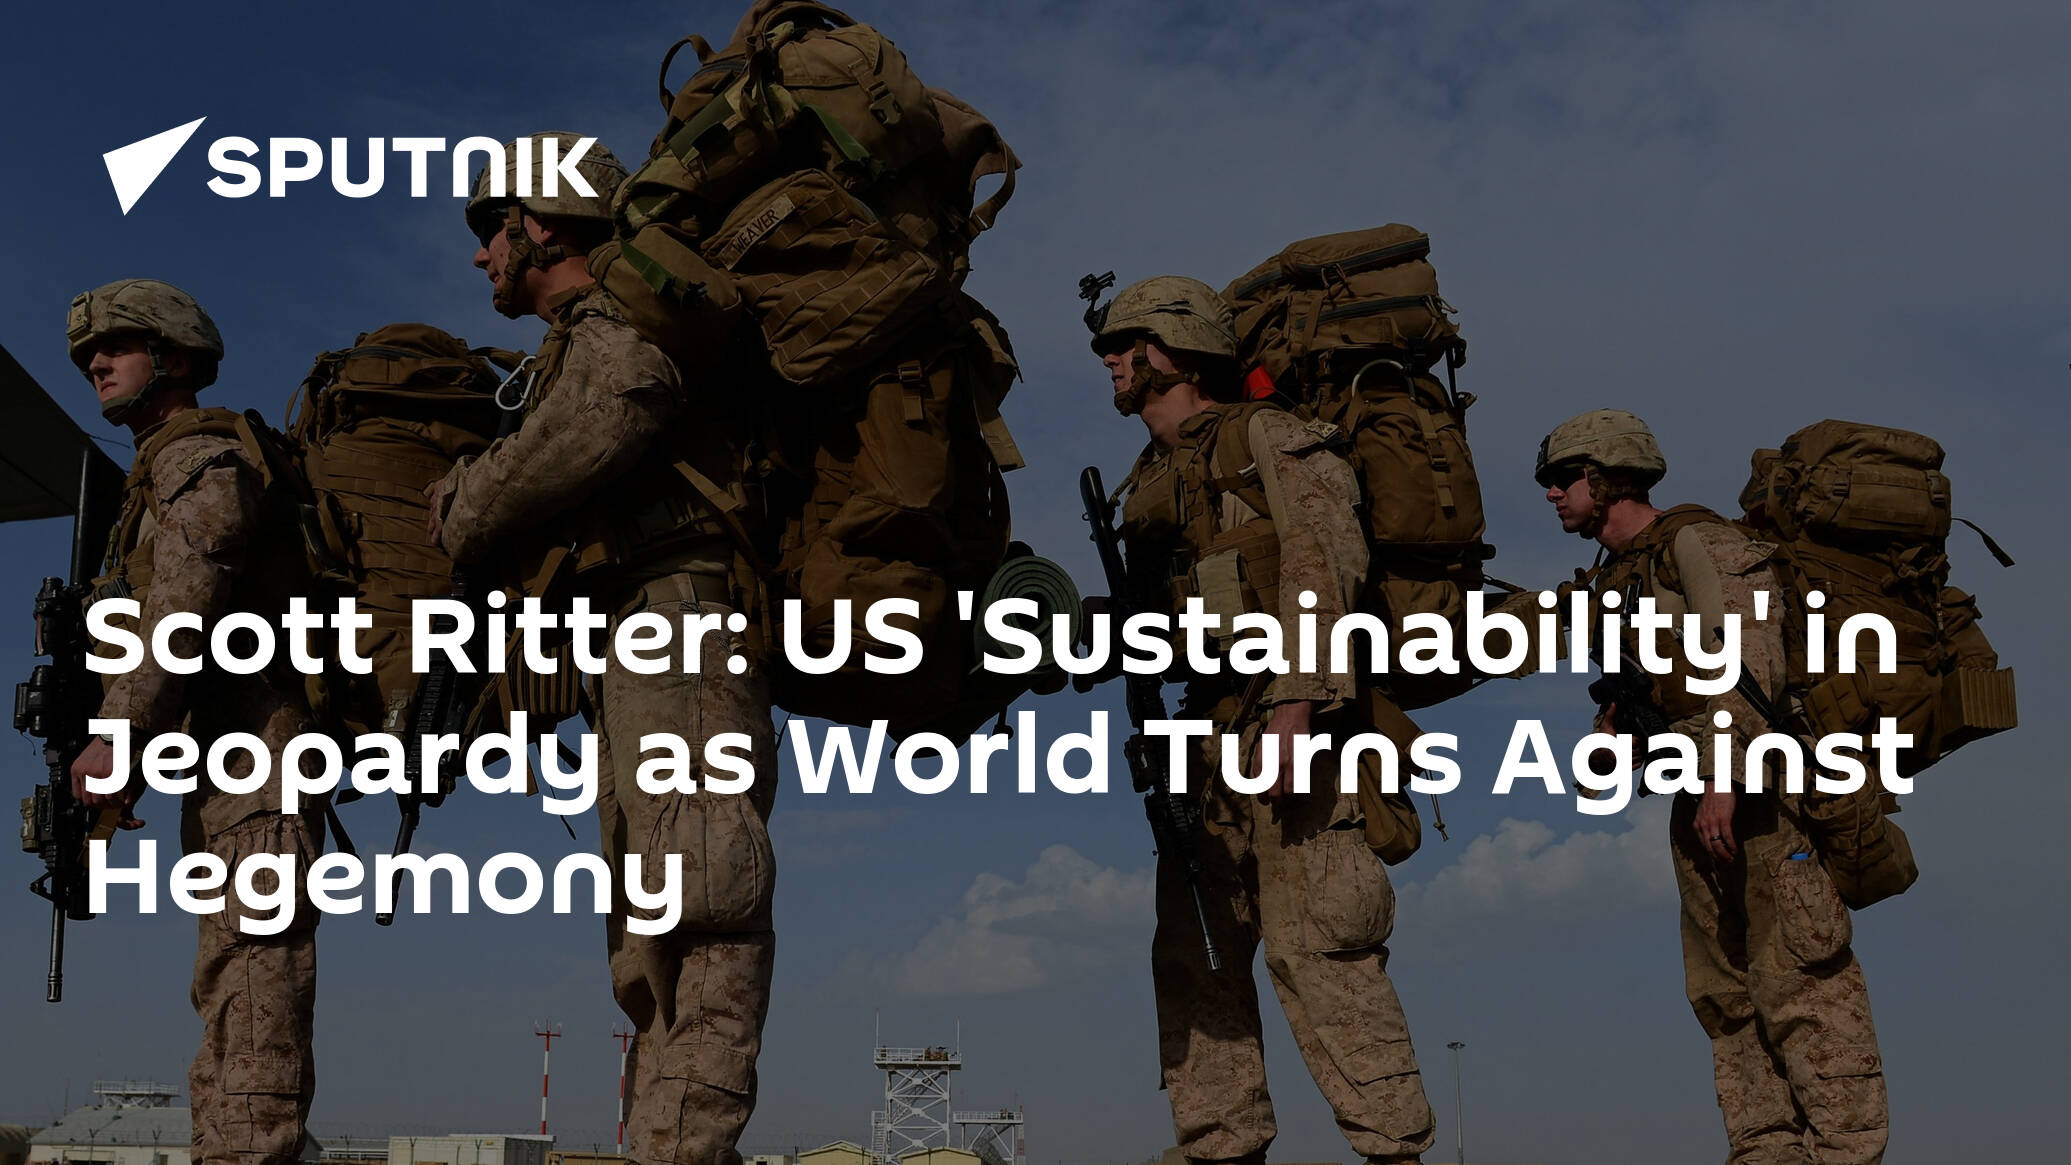 Scott Ritter: US 'Sustainability' in Jeopardy as World Turns Against Hegemony